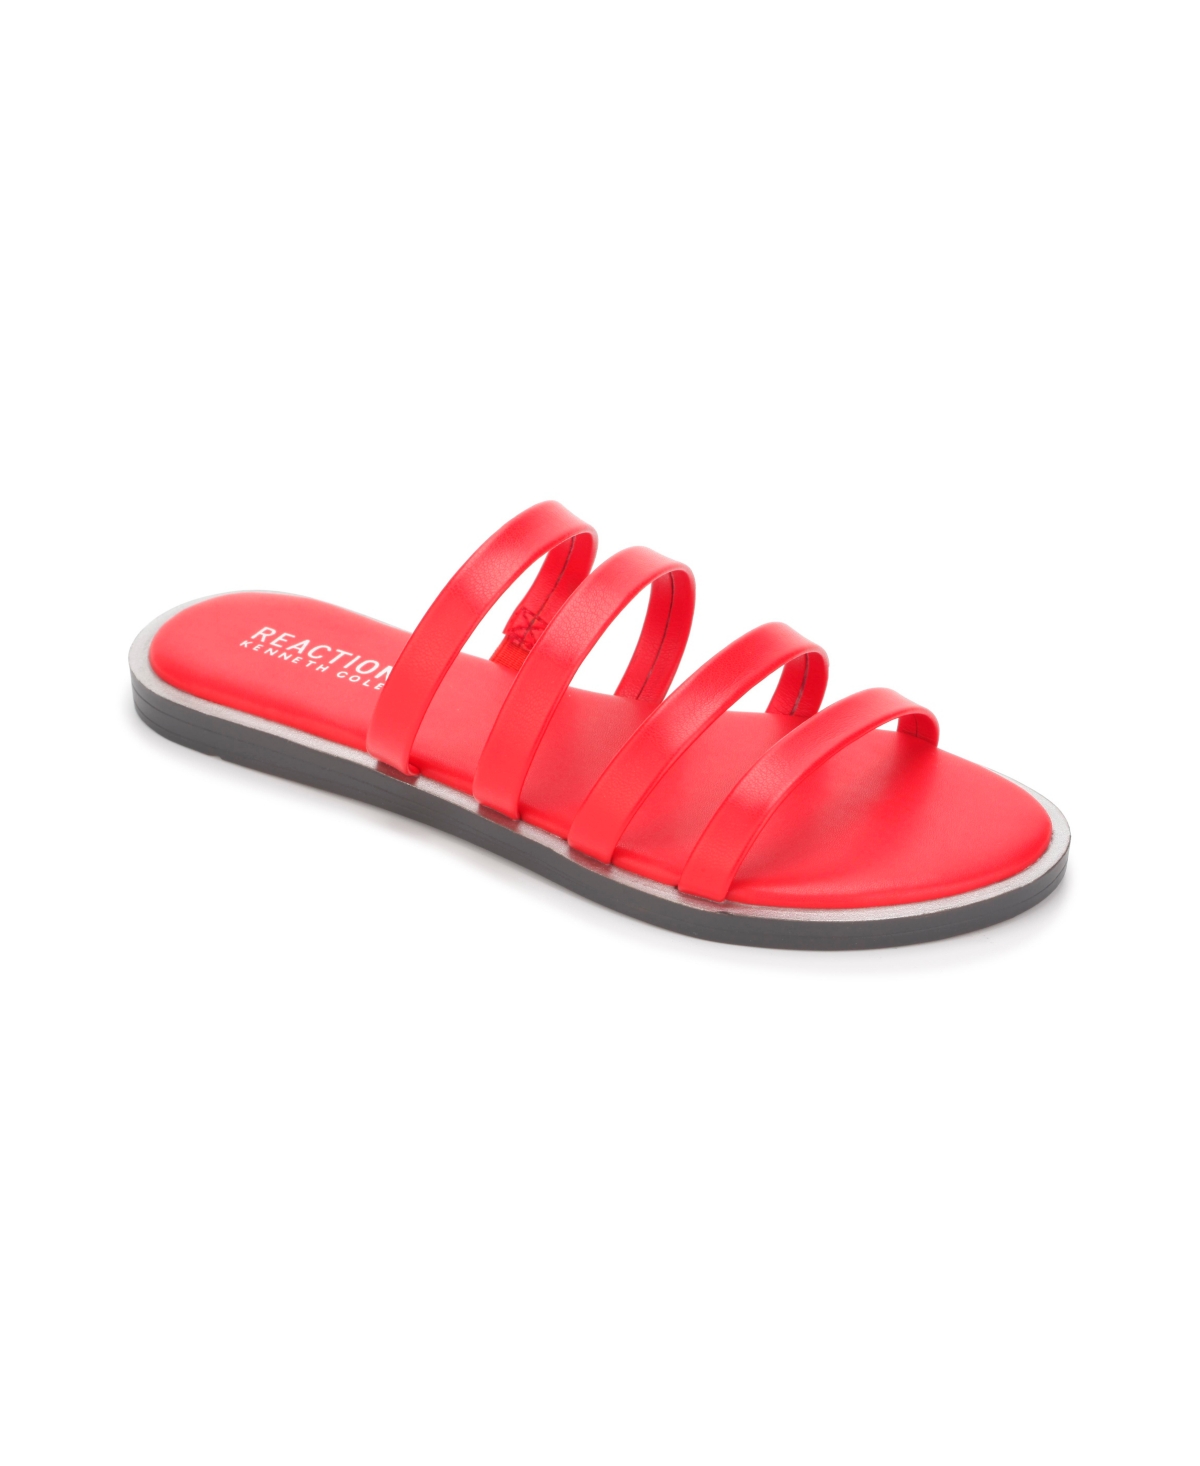 Women's Sloan Four Band Slide Flat Sandals - Red